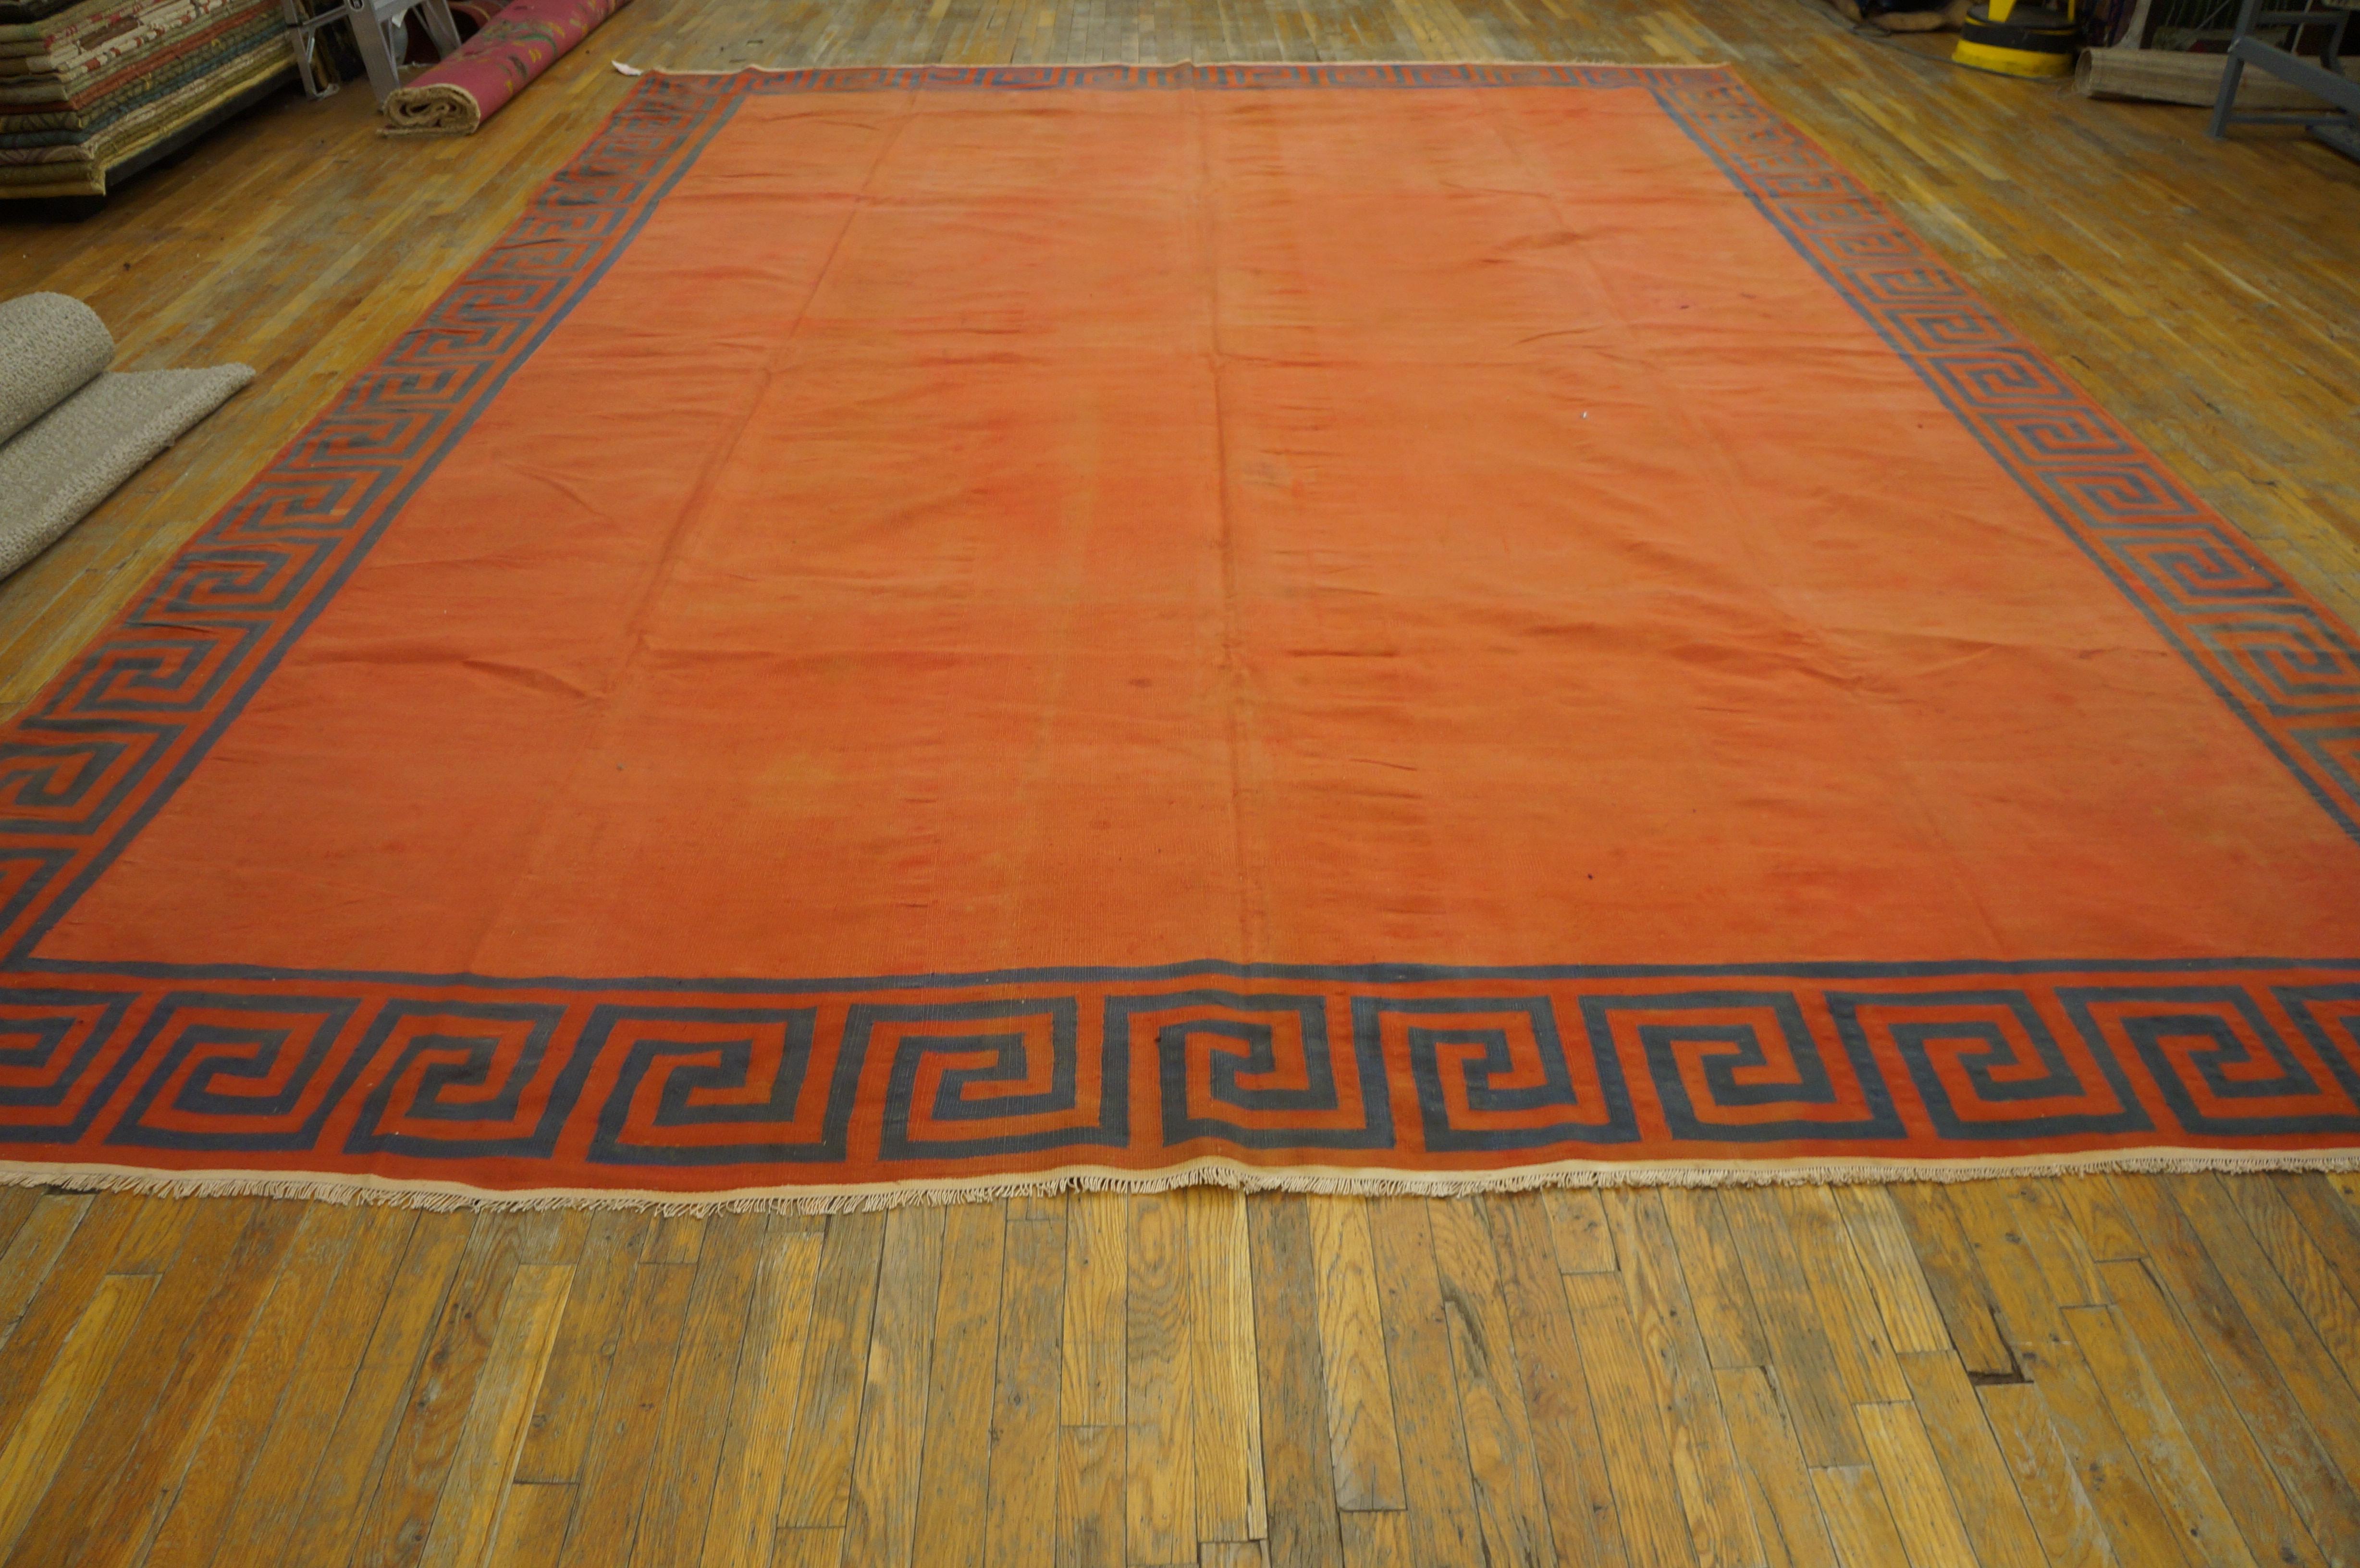 The totally plain salmon-orange field is neatly framed by the middle blue and salmon squared wave border. The blue has a light abrash. Good condition for this antique Indian cotton pileless carpet.